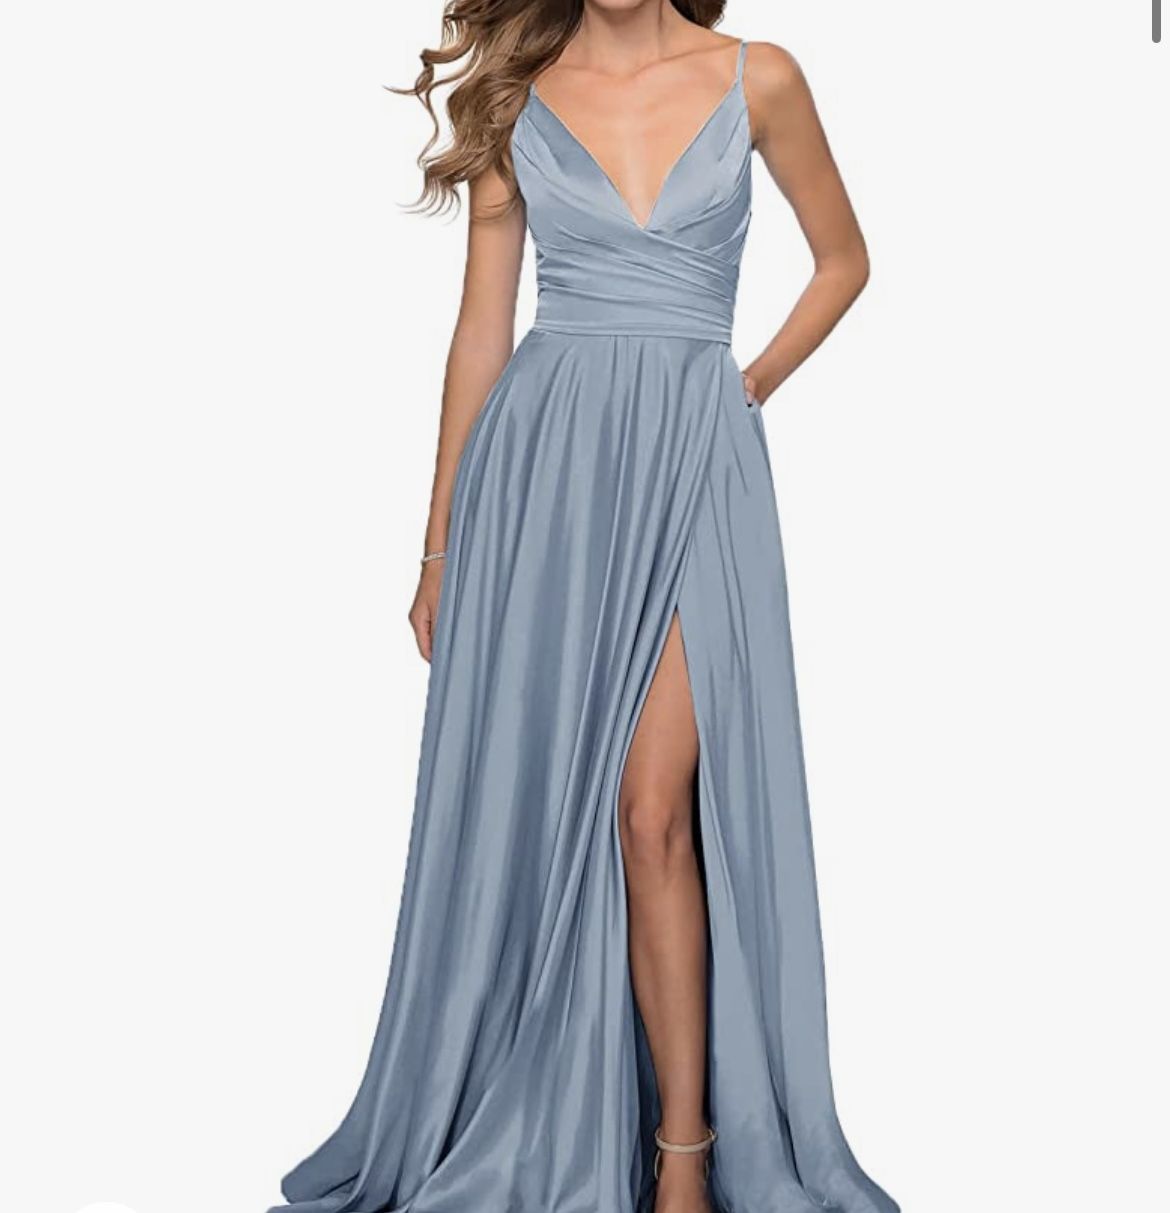 Satin blue Dress With Corset Back And Pockets